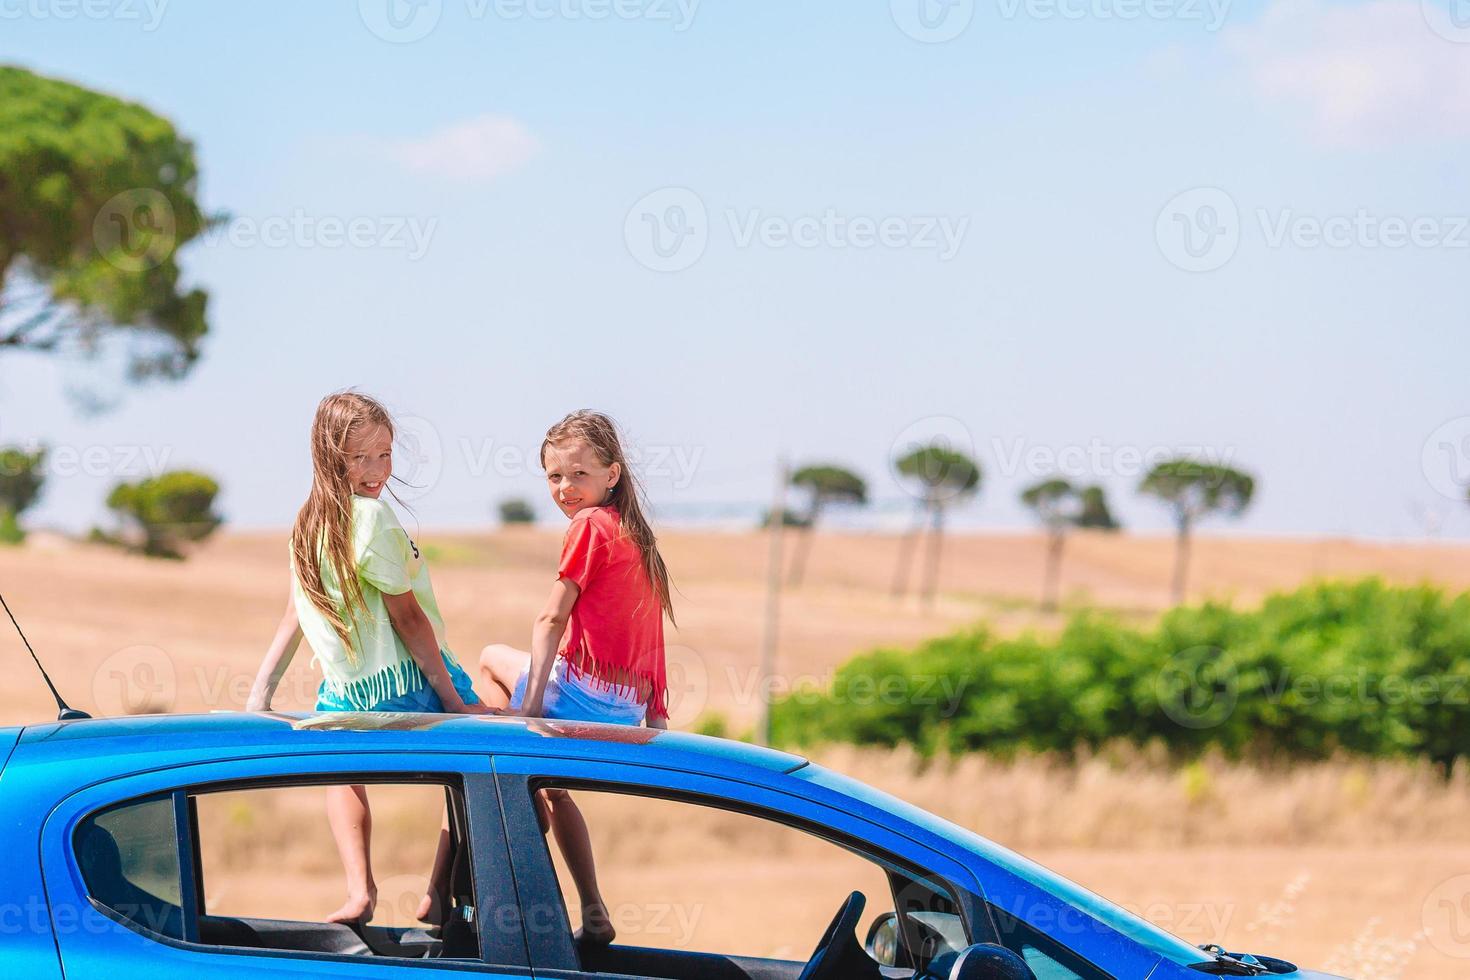 Summer car trip and young family on vacation photo